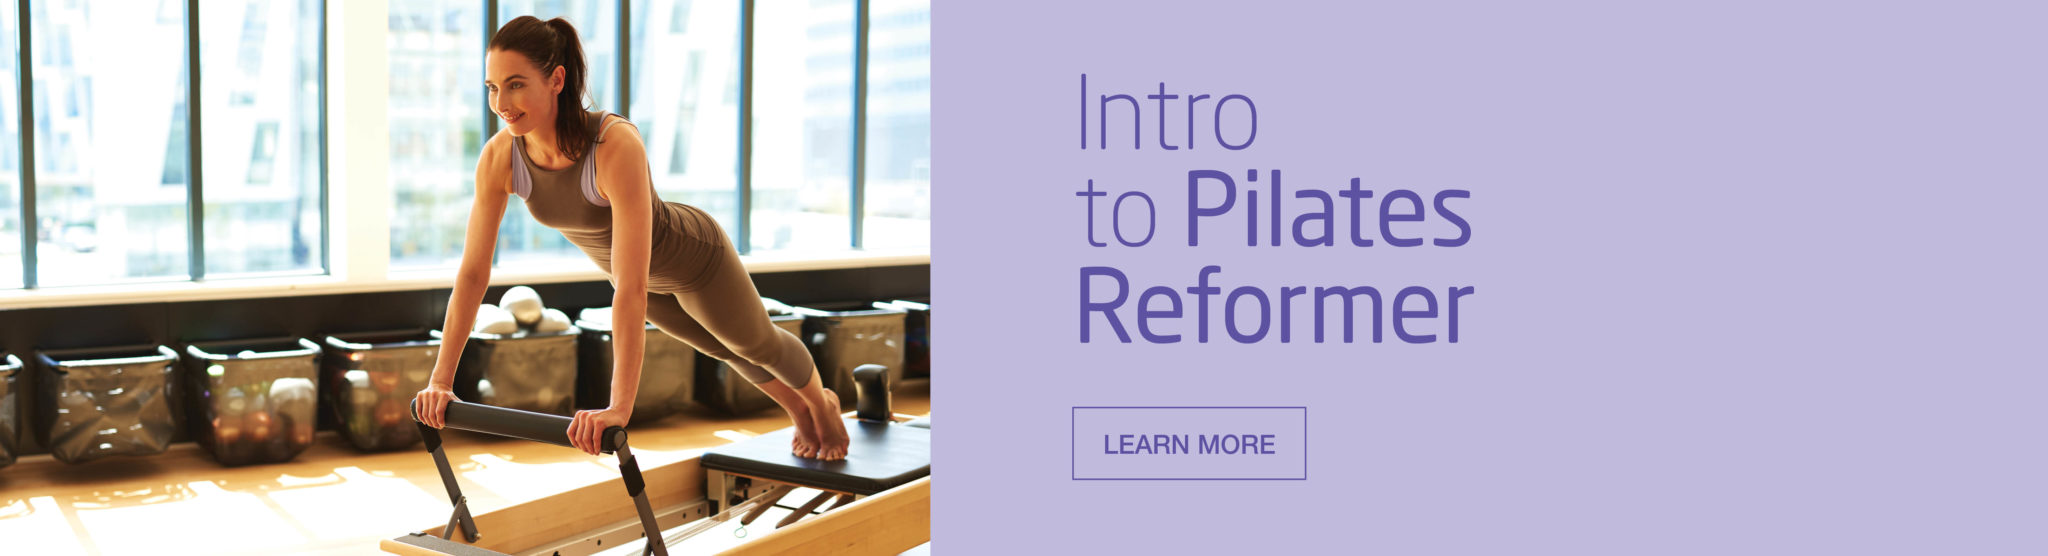 Intro to Pilates Reformer learn more